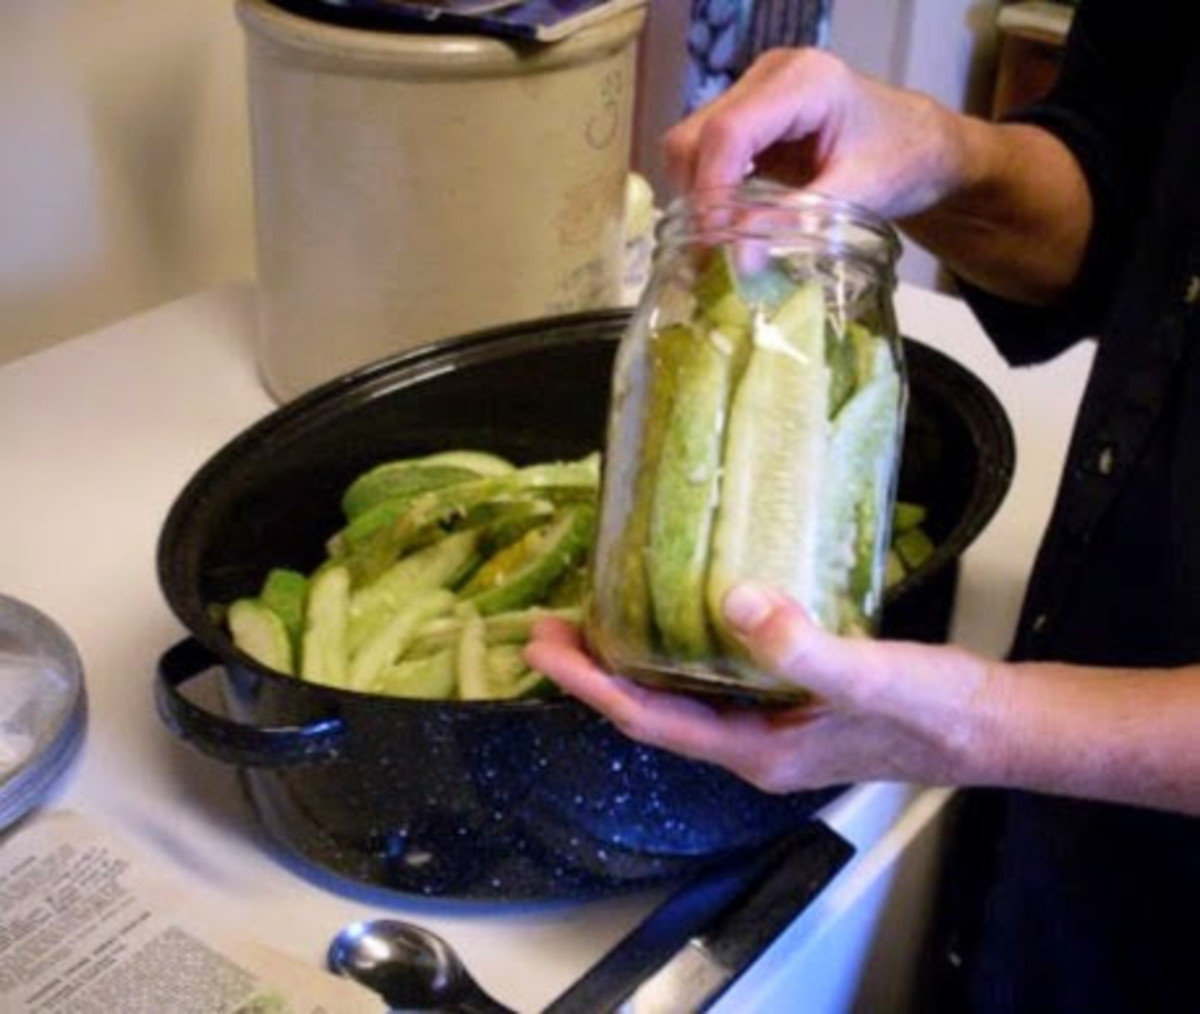 Meanwhile, pack cucumber sticks into clean jars. Pack tightly, but don't crush. They will shrink some when heated. 